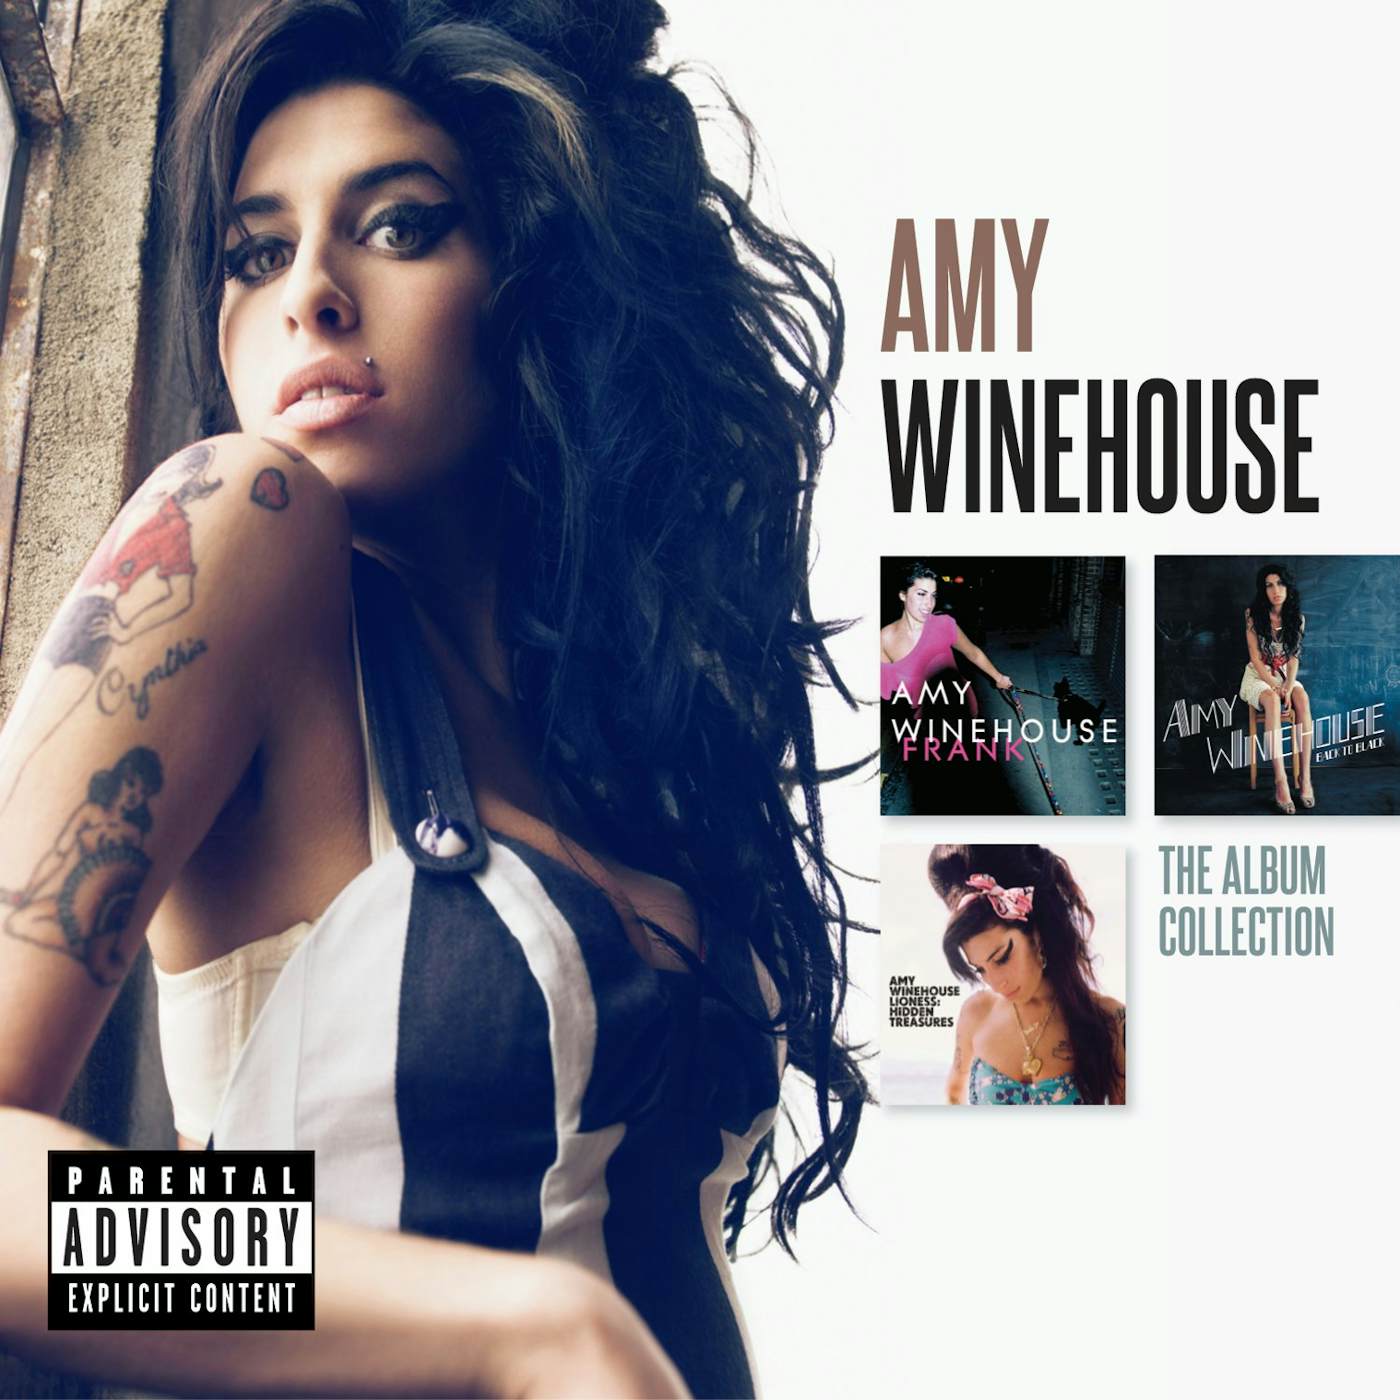 Amy Winehouse ALBUM COLLECTION CD